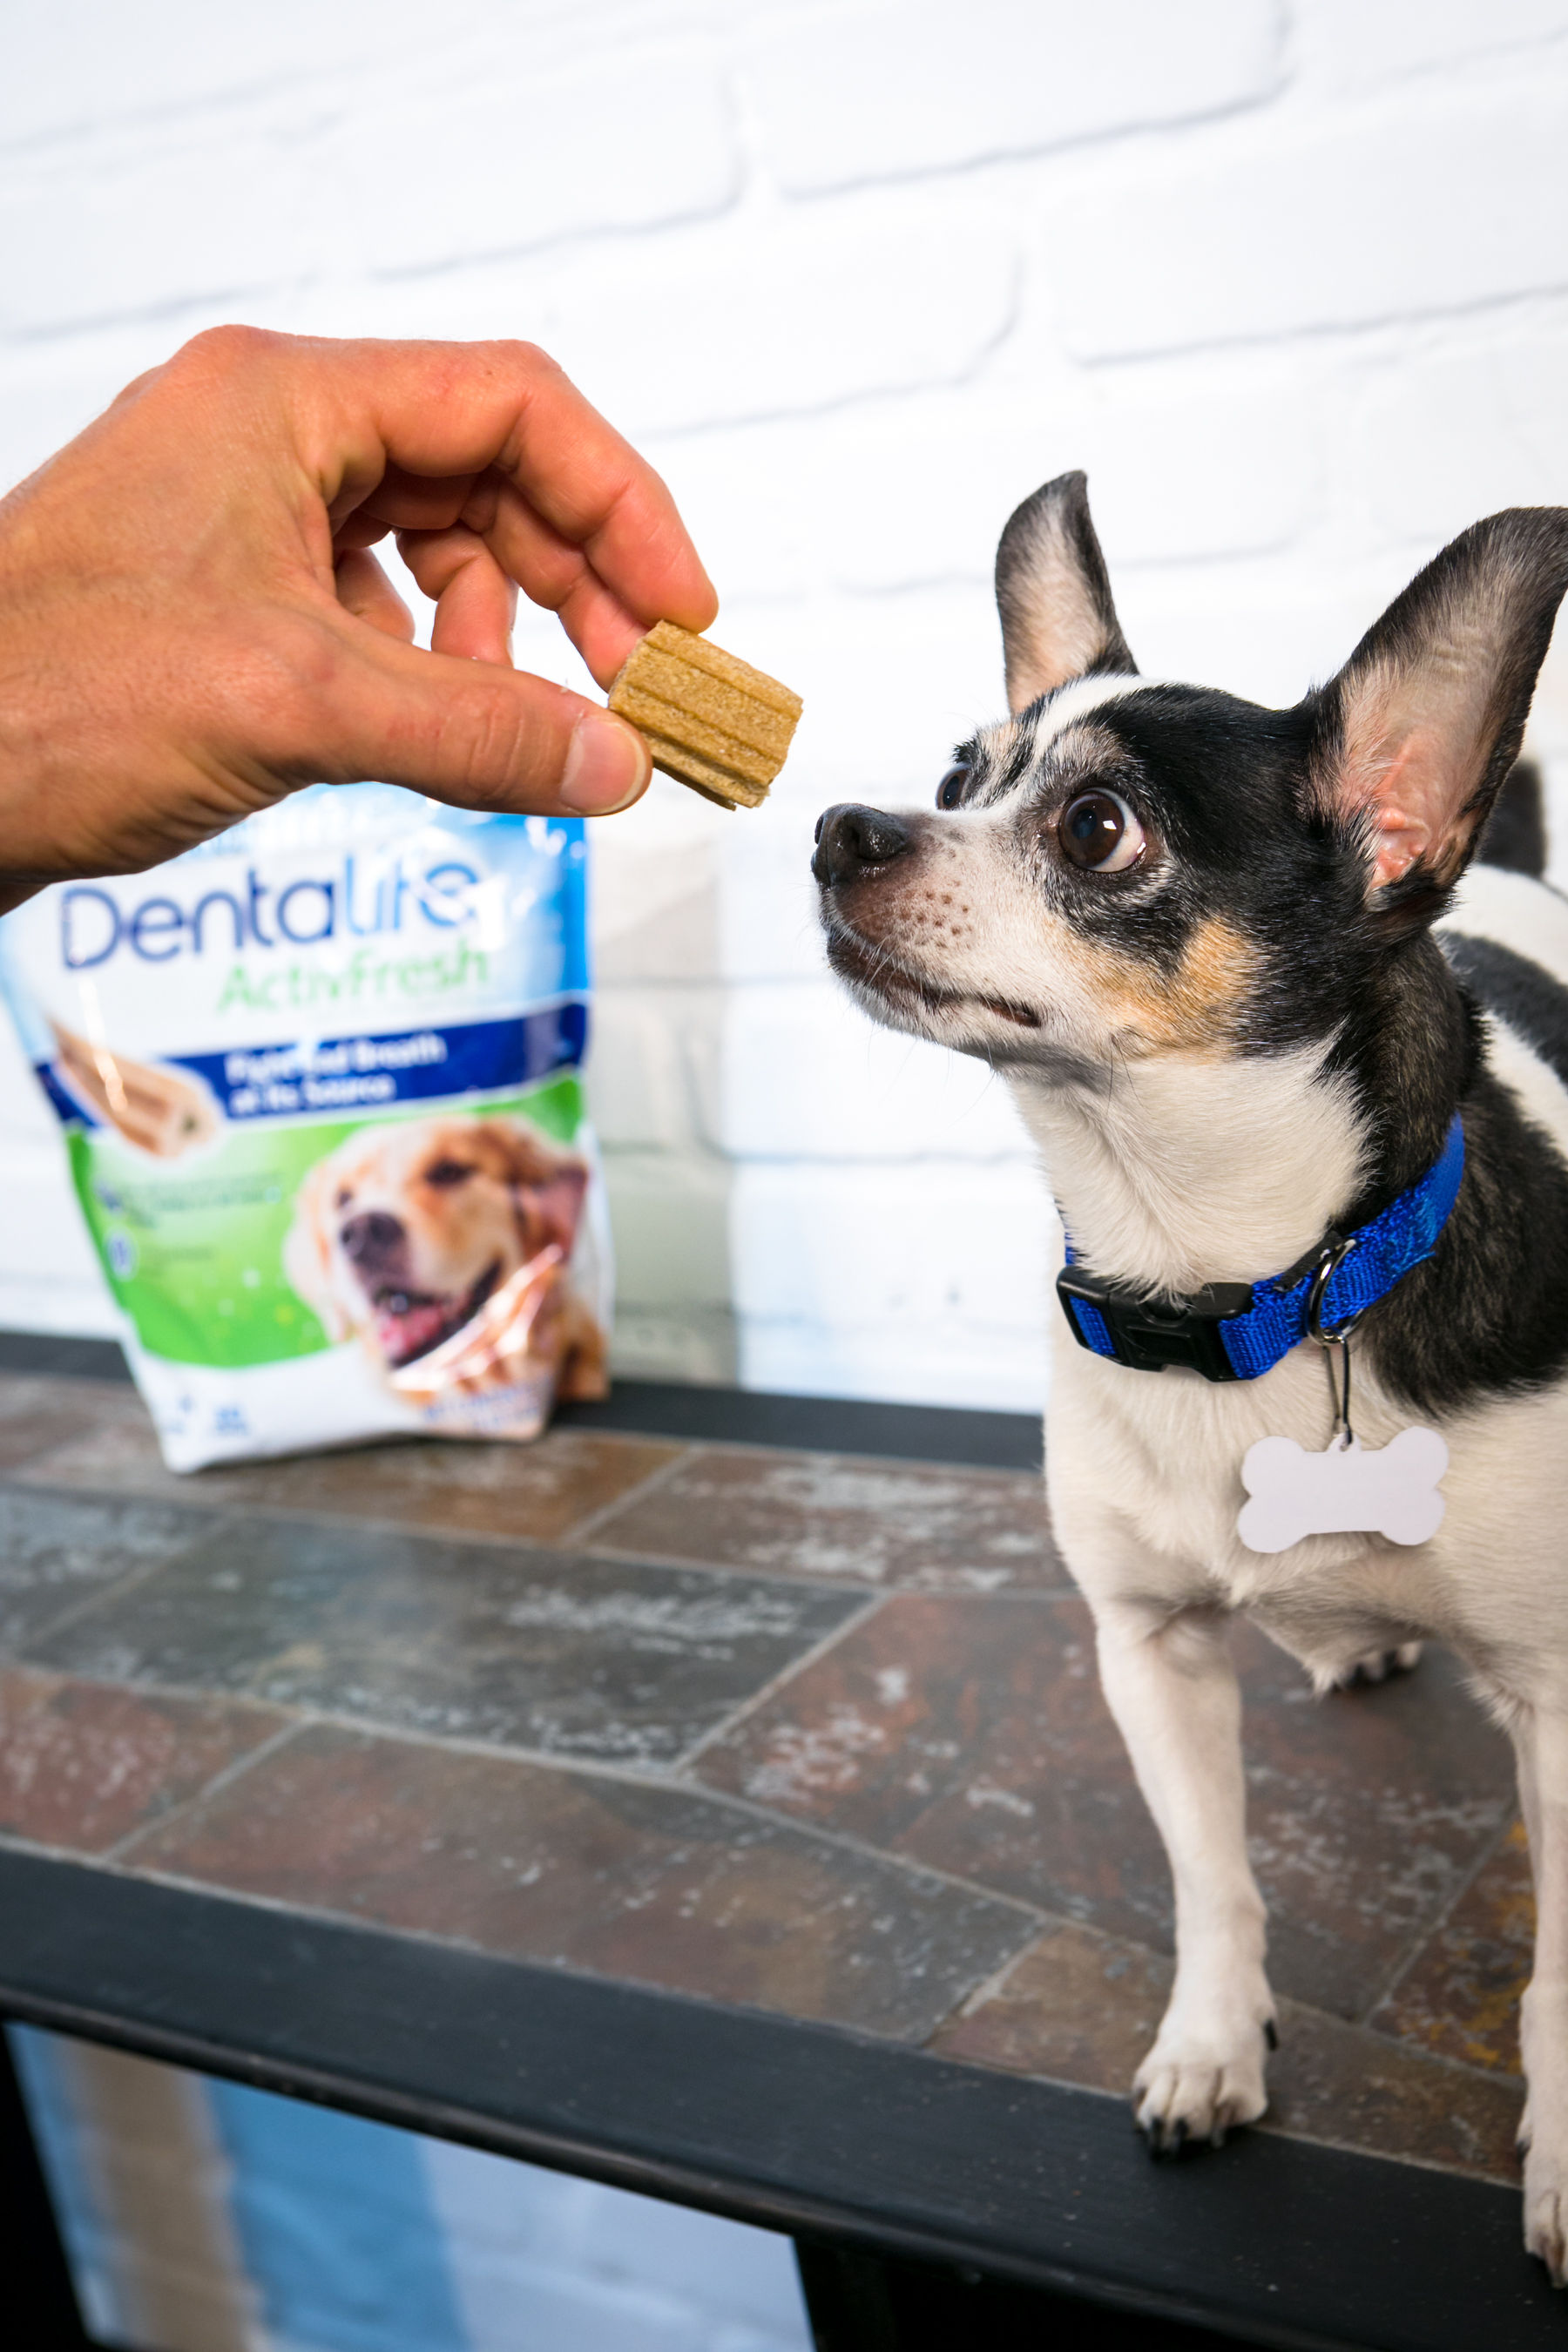 Well-known veterinarian and host of Animal Planet’s “Evan Goes Wild,” Dr. Evan Antin gives his dog Henry new Purina DentaLife ActivFresh; a scrumptious chew made with an active-ingredient blend of honey and natural spirulina that has been scientifically tested to fight bad breath at the source.